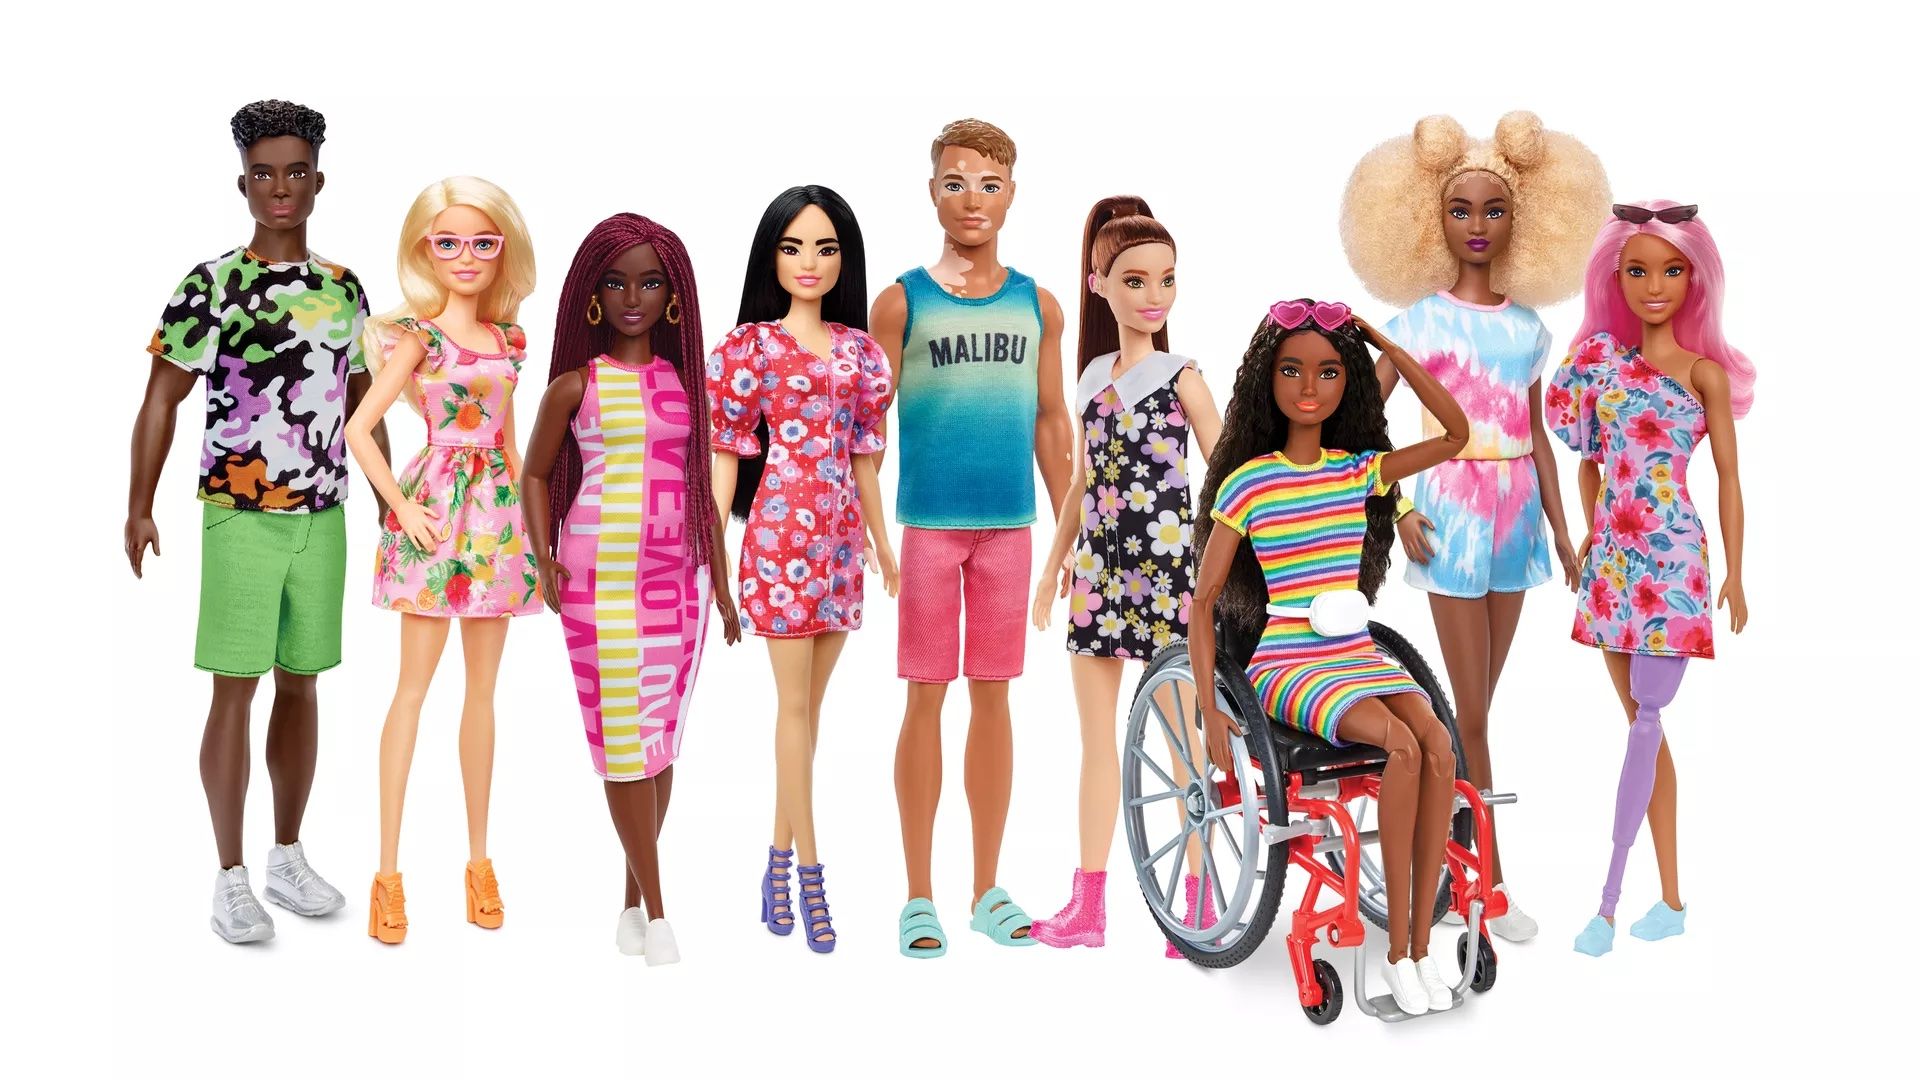 A new line of diverse Barbie dolls.